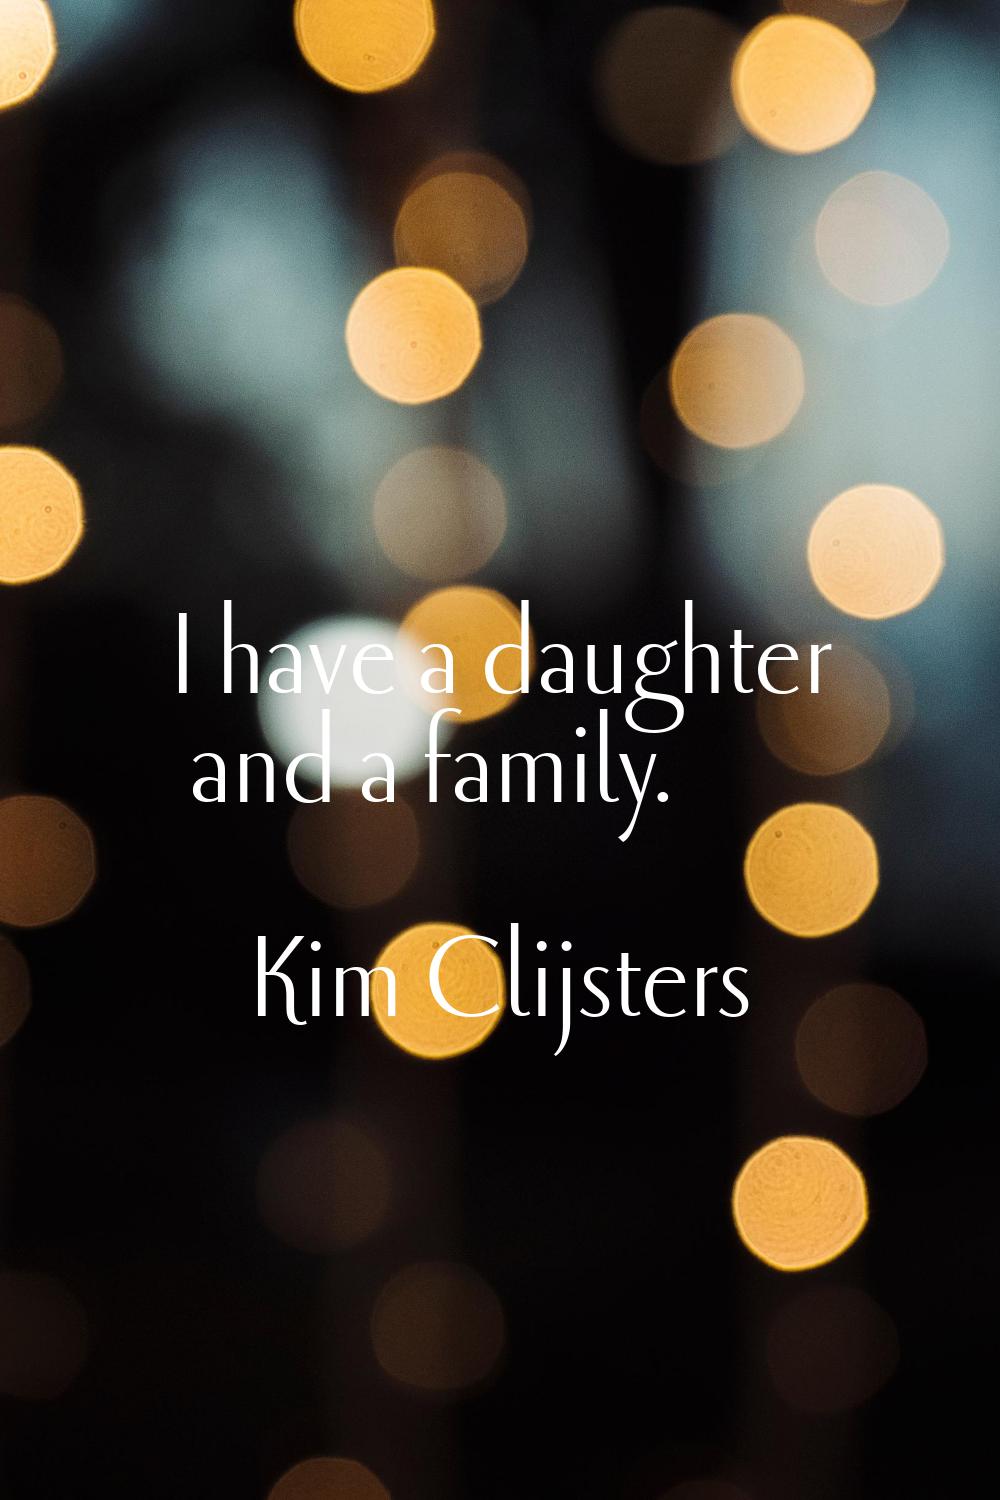 I have a daughter and a family.